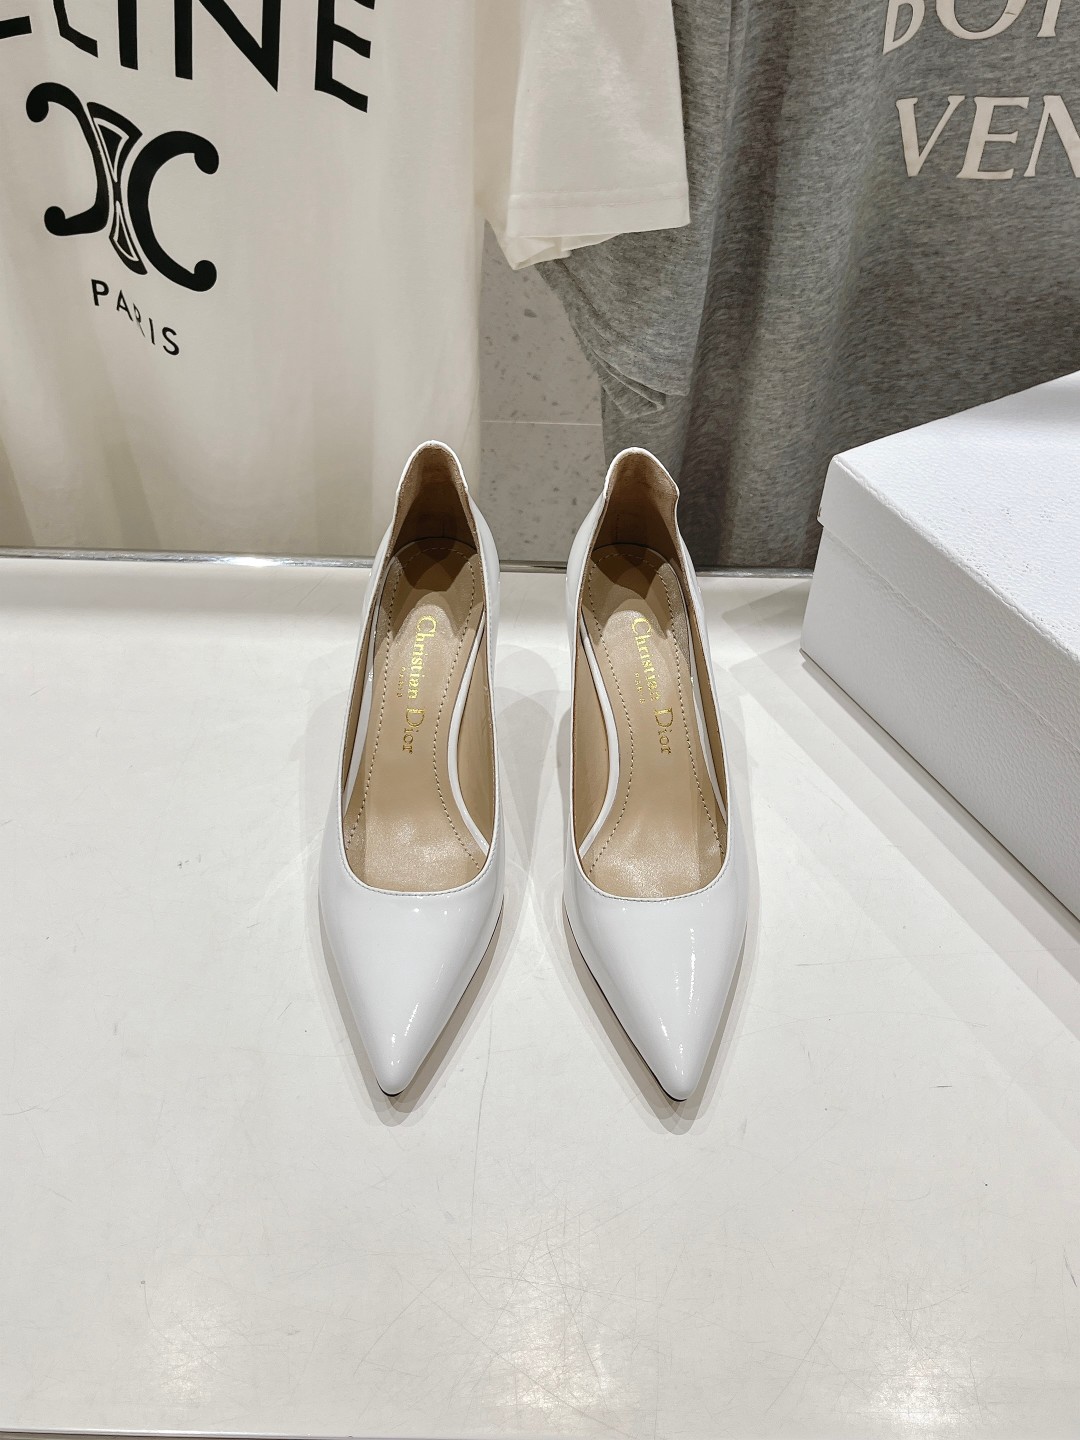 Dior High Heel Pumps Single Layer Shoes Genuine Leather Patent Sheepskin Fall Collection